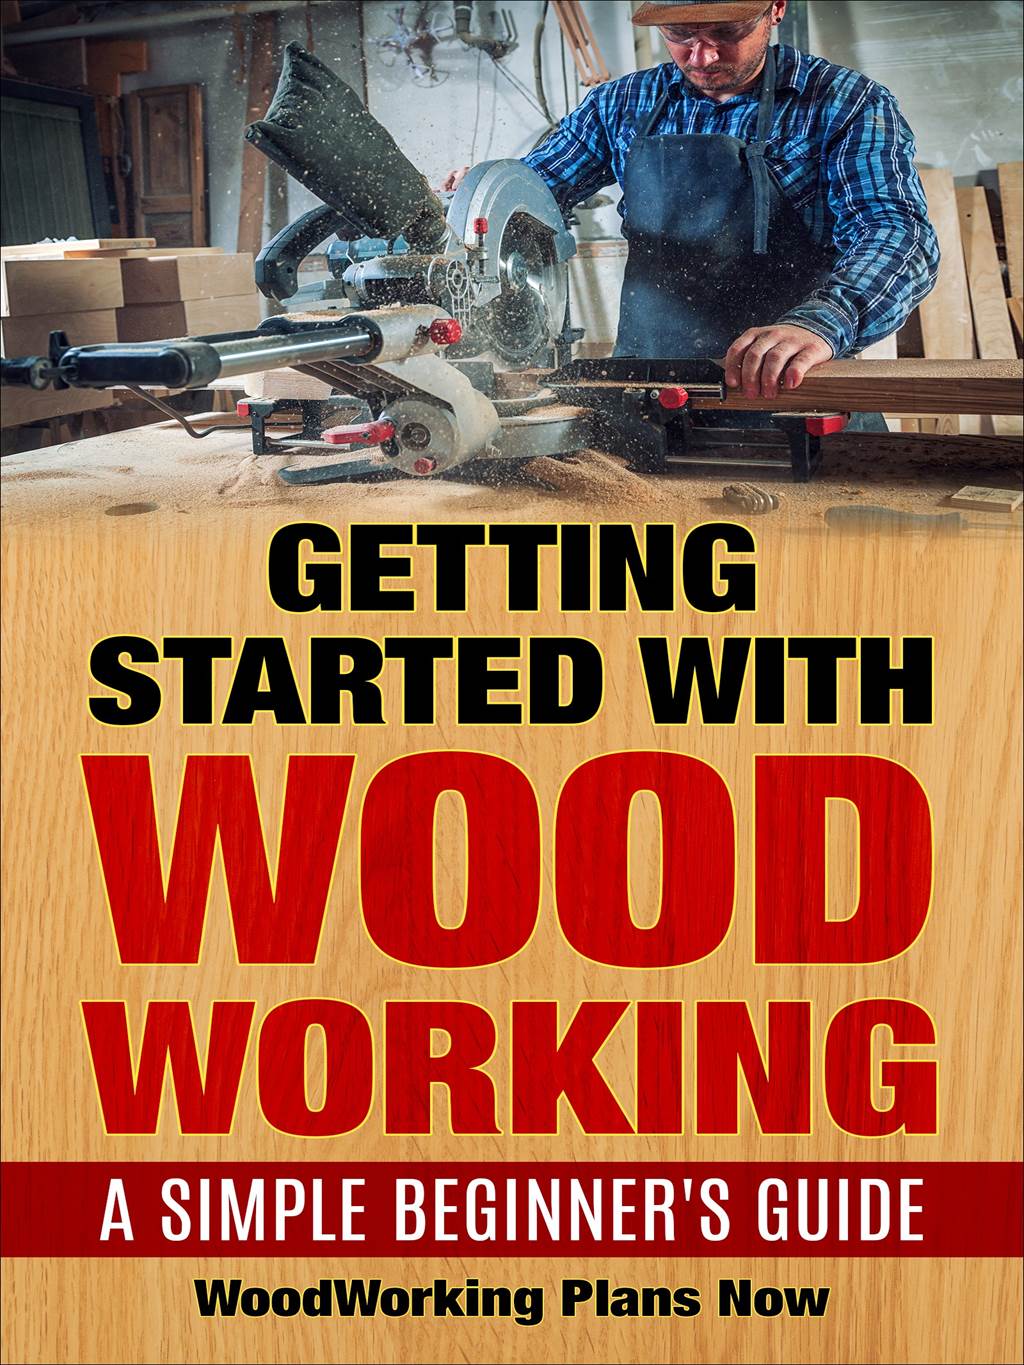 Books on woodworking for beginners